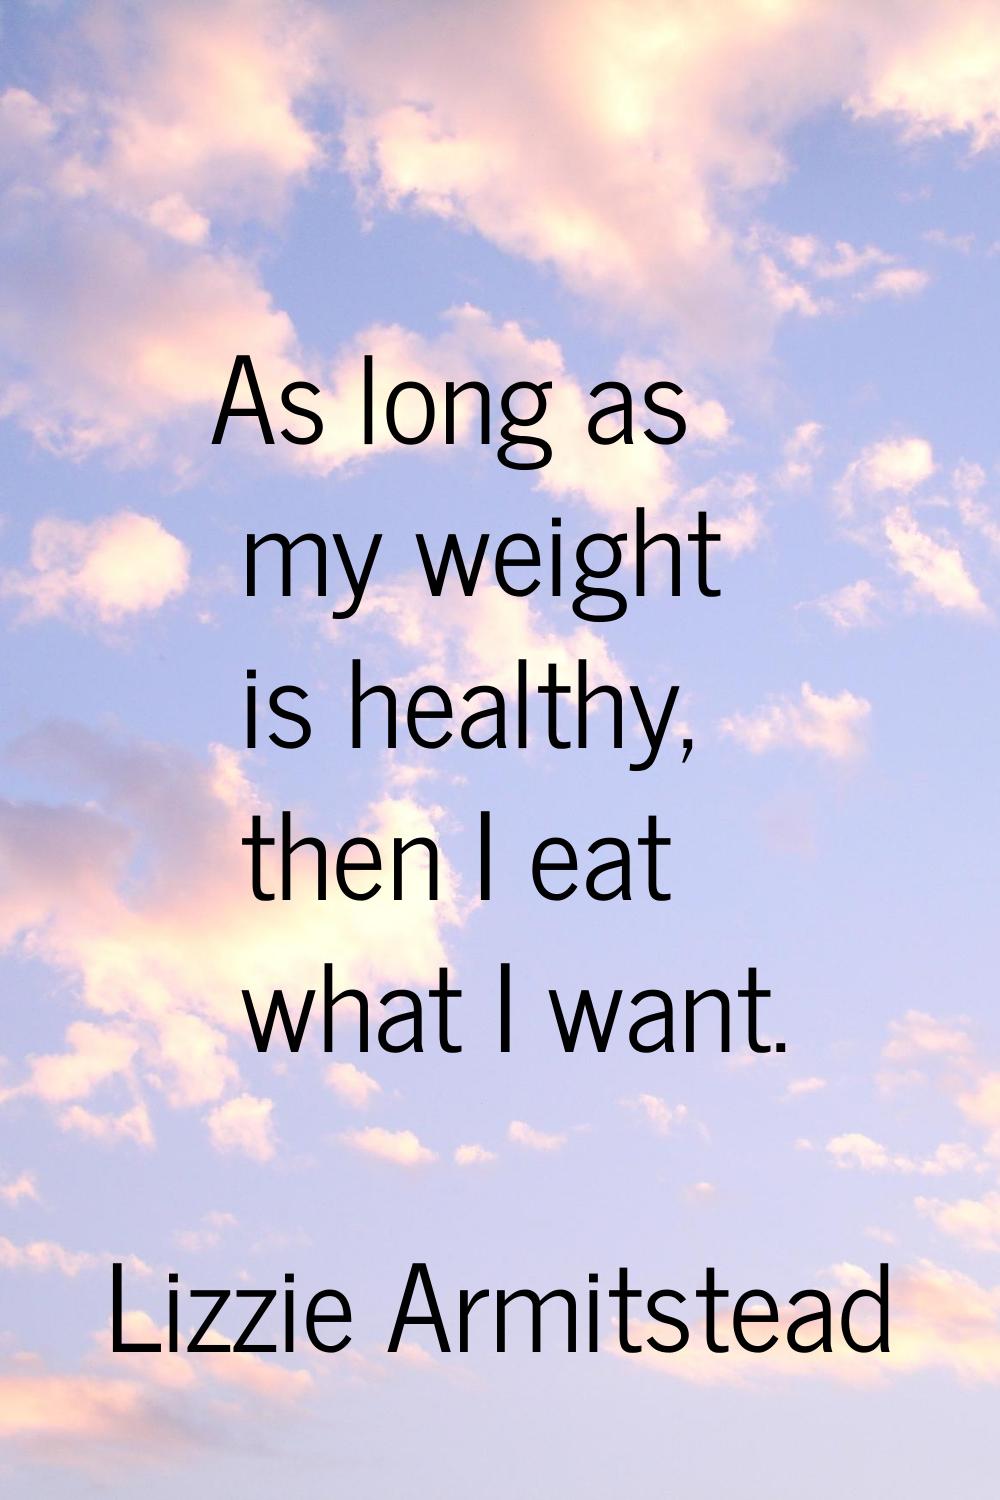 As long as my weight is healthy, then I eat what I want.